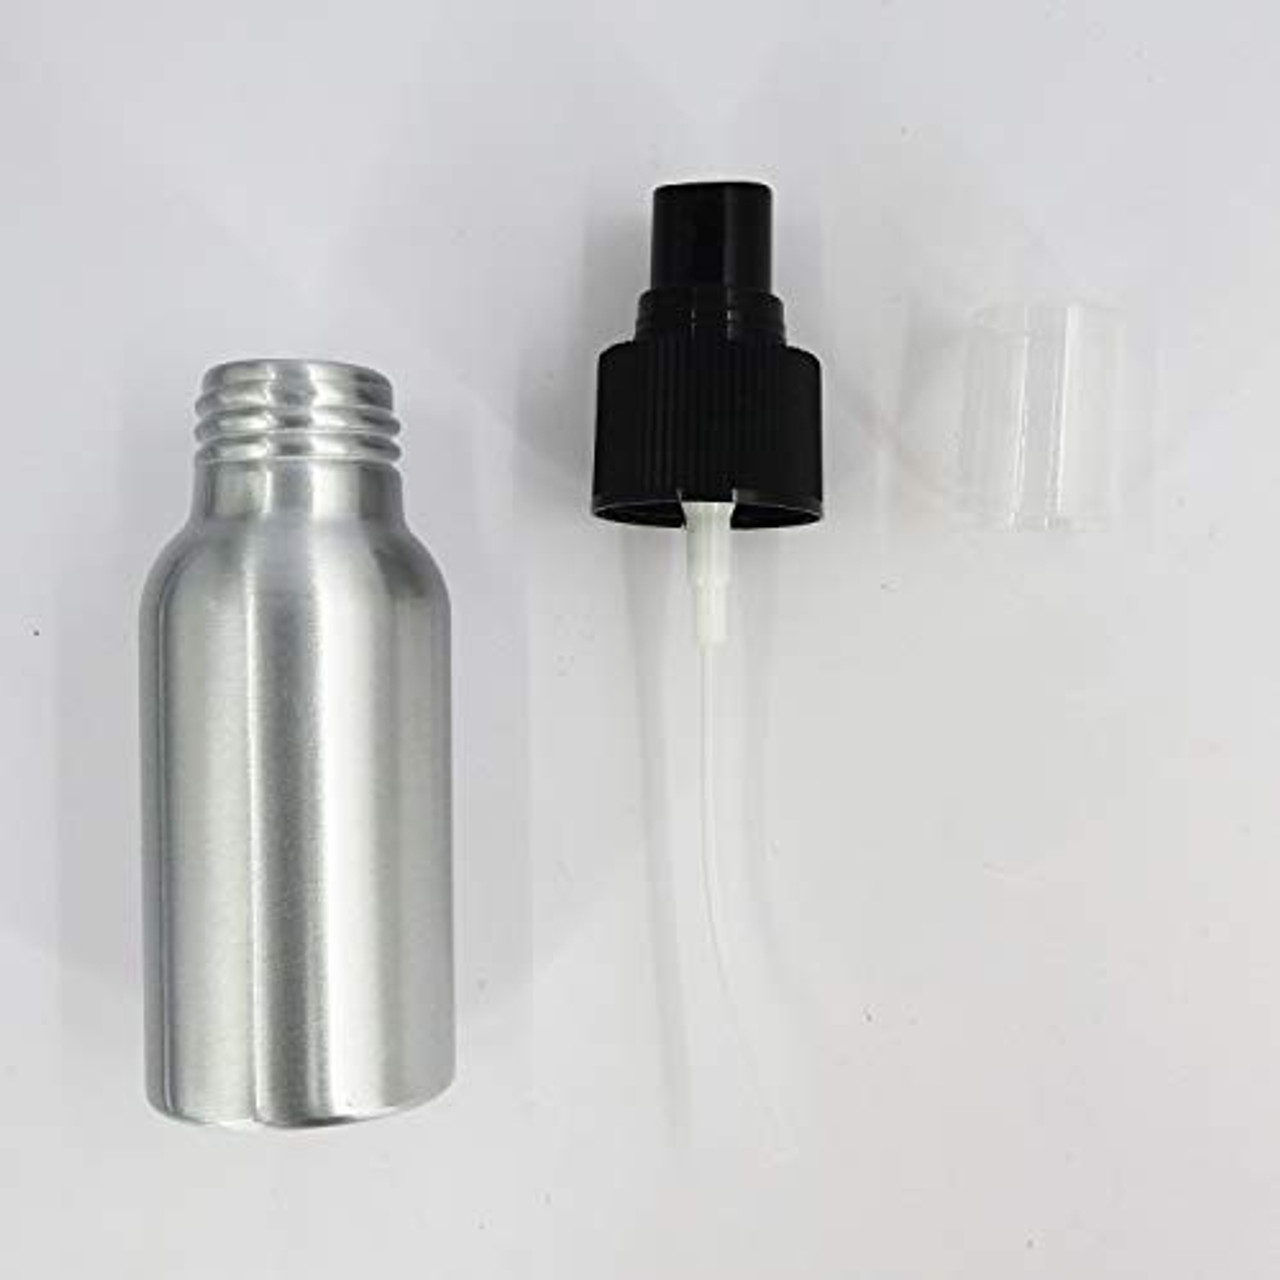 5ml 9ml Perfume Spray Bottle Empty Glass Atomizer Travel Cosmetic Bottle  Sample Vials Refillable Bottle Drop Shipping Wholesale